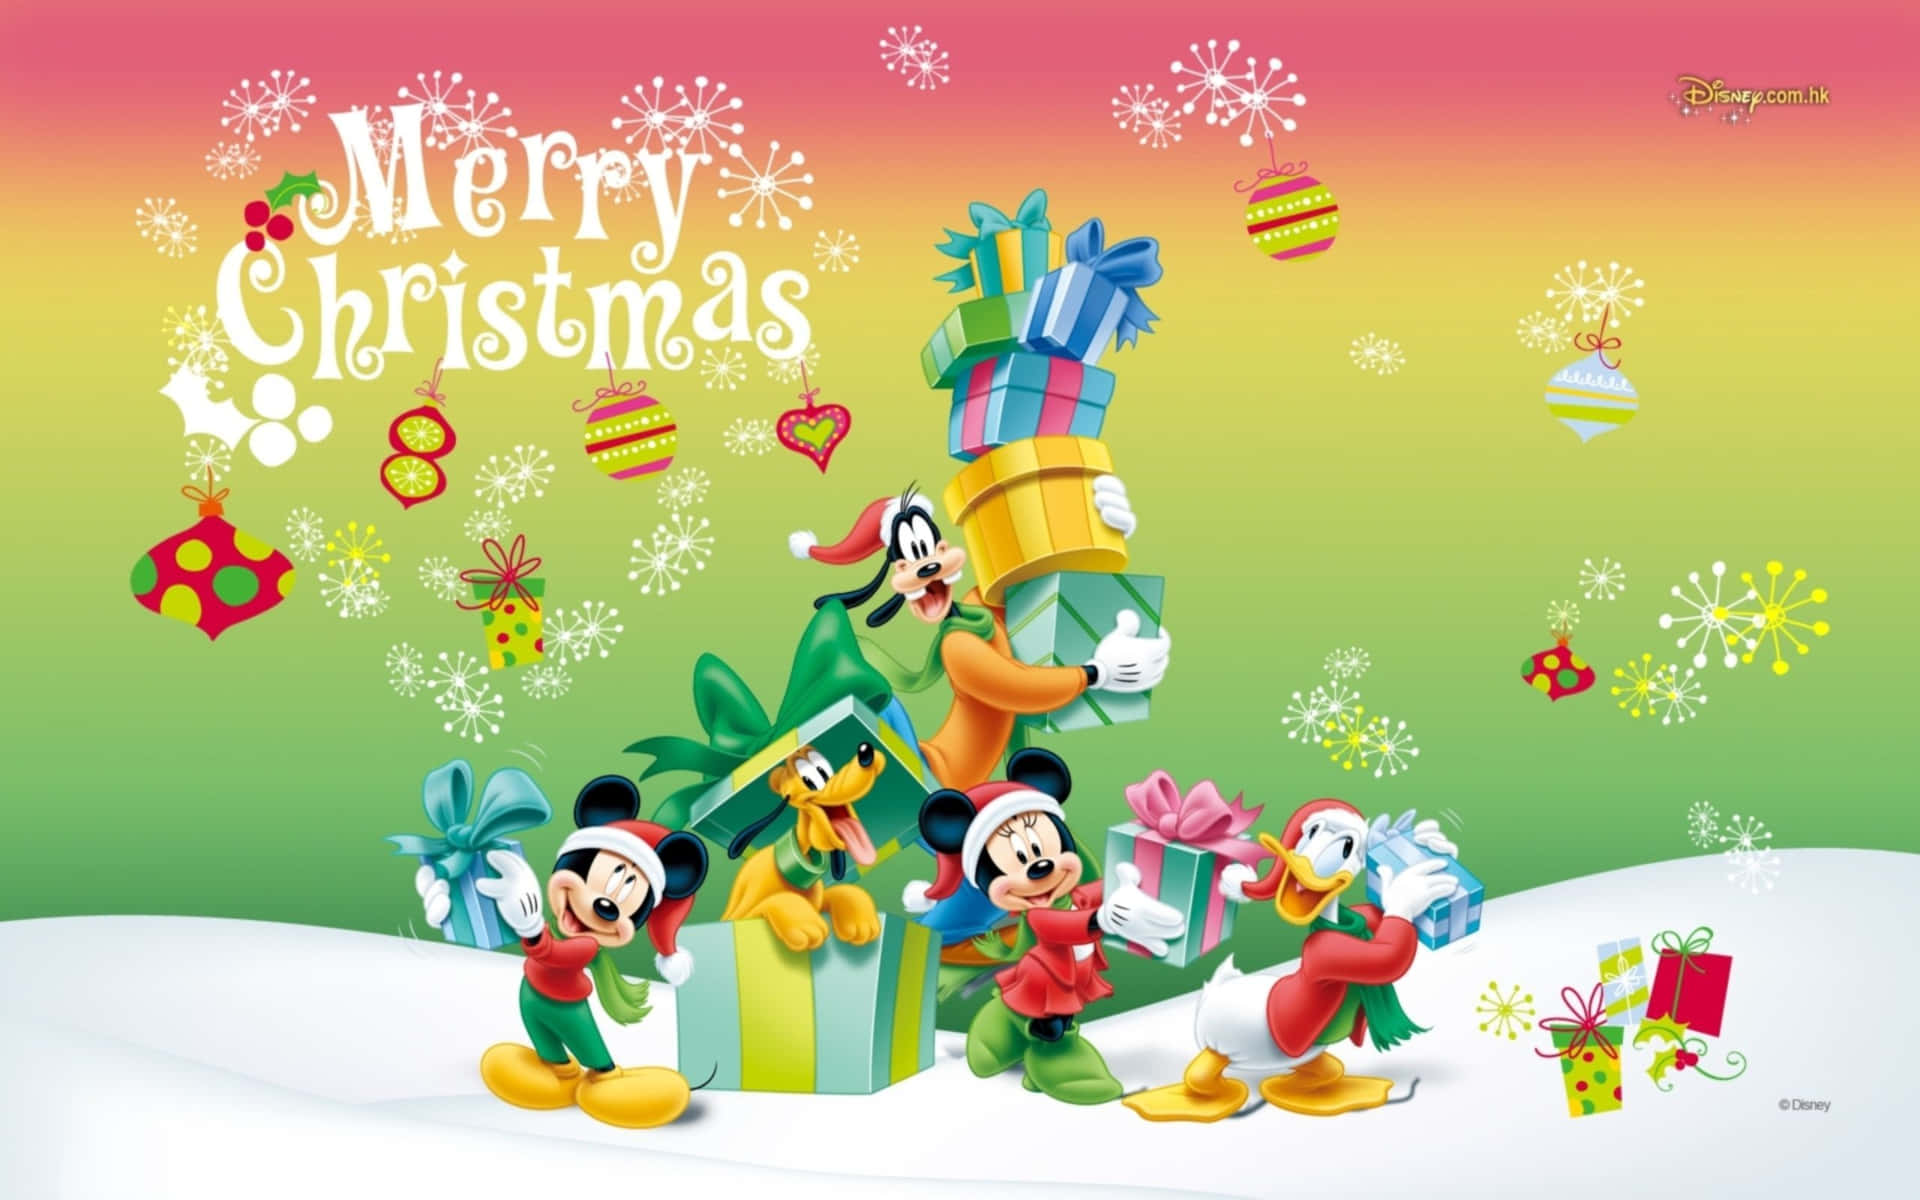 Celebrating the holidays with Disney Christmas characters on a bright and cheerful iPad. Wallpaper